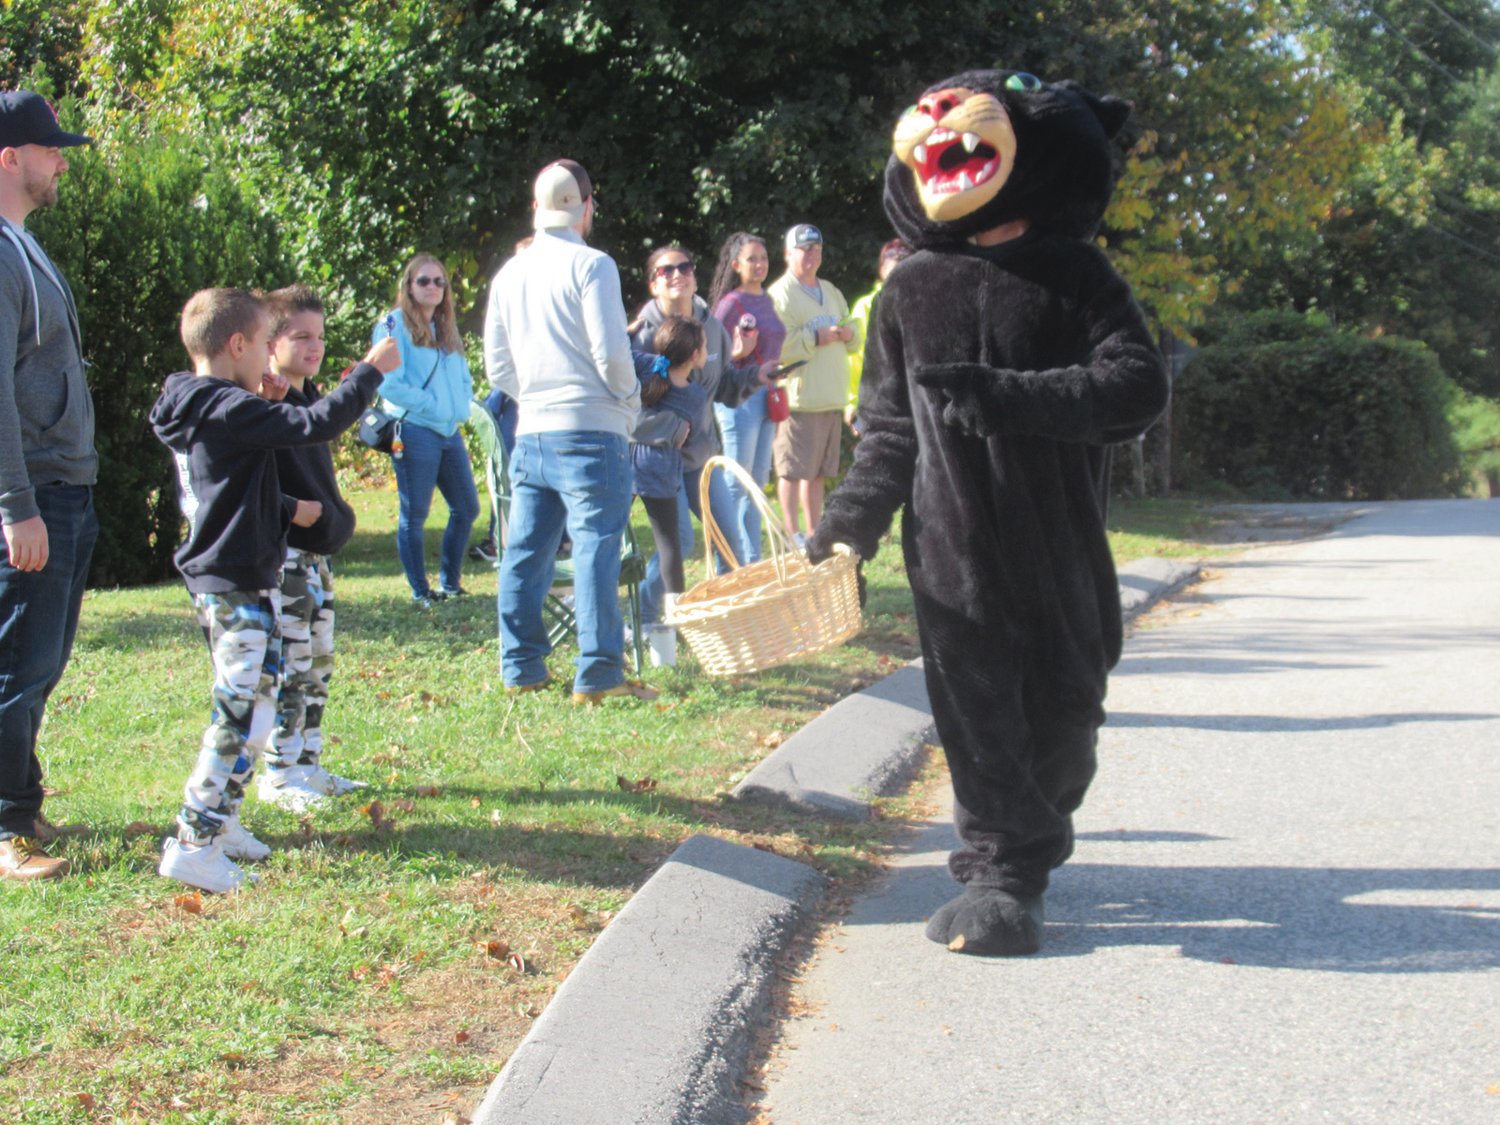 MIGHTY MASCOT: Johnston High’s Panther was a huge hit with young and old alike during the recent Homecoming Parade.